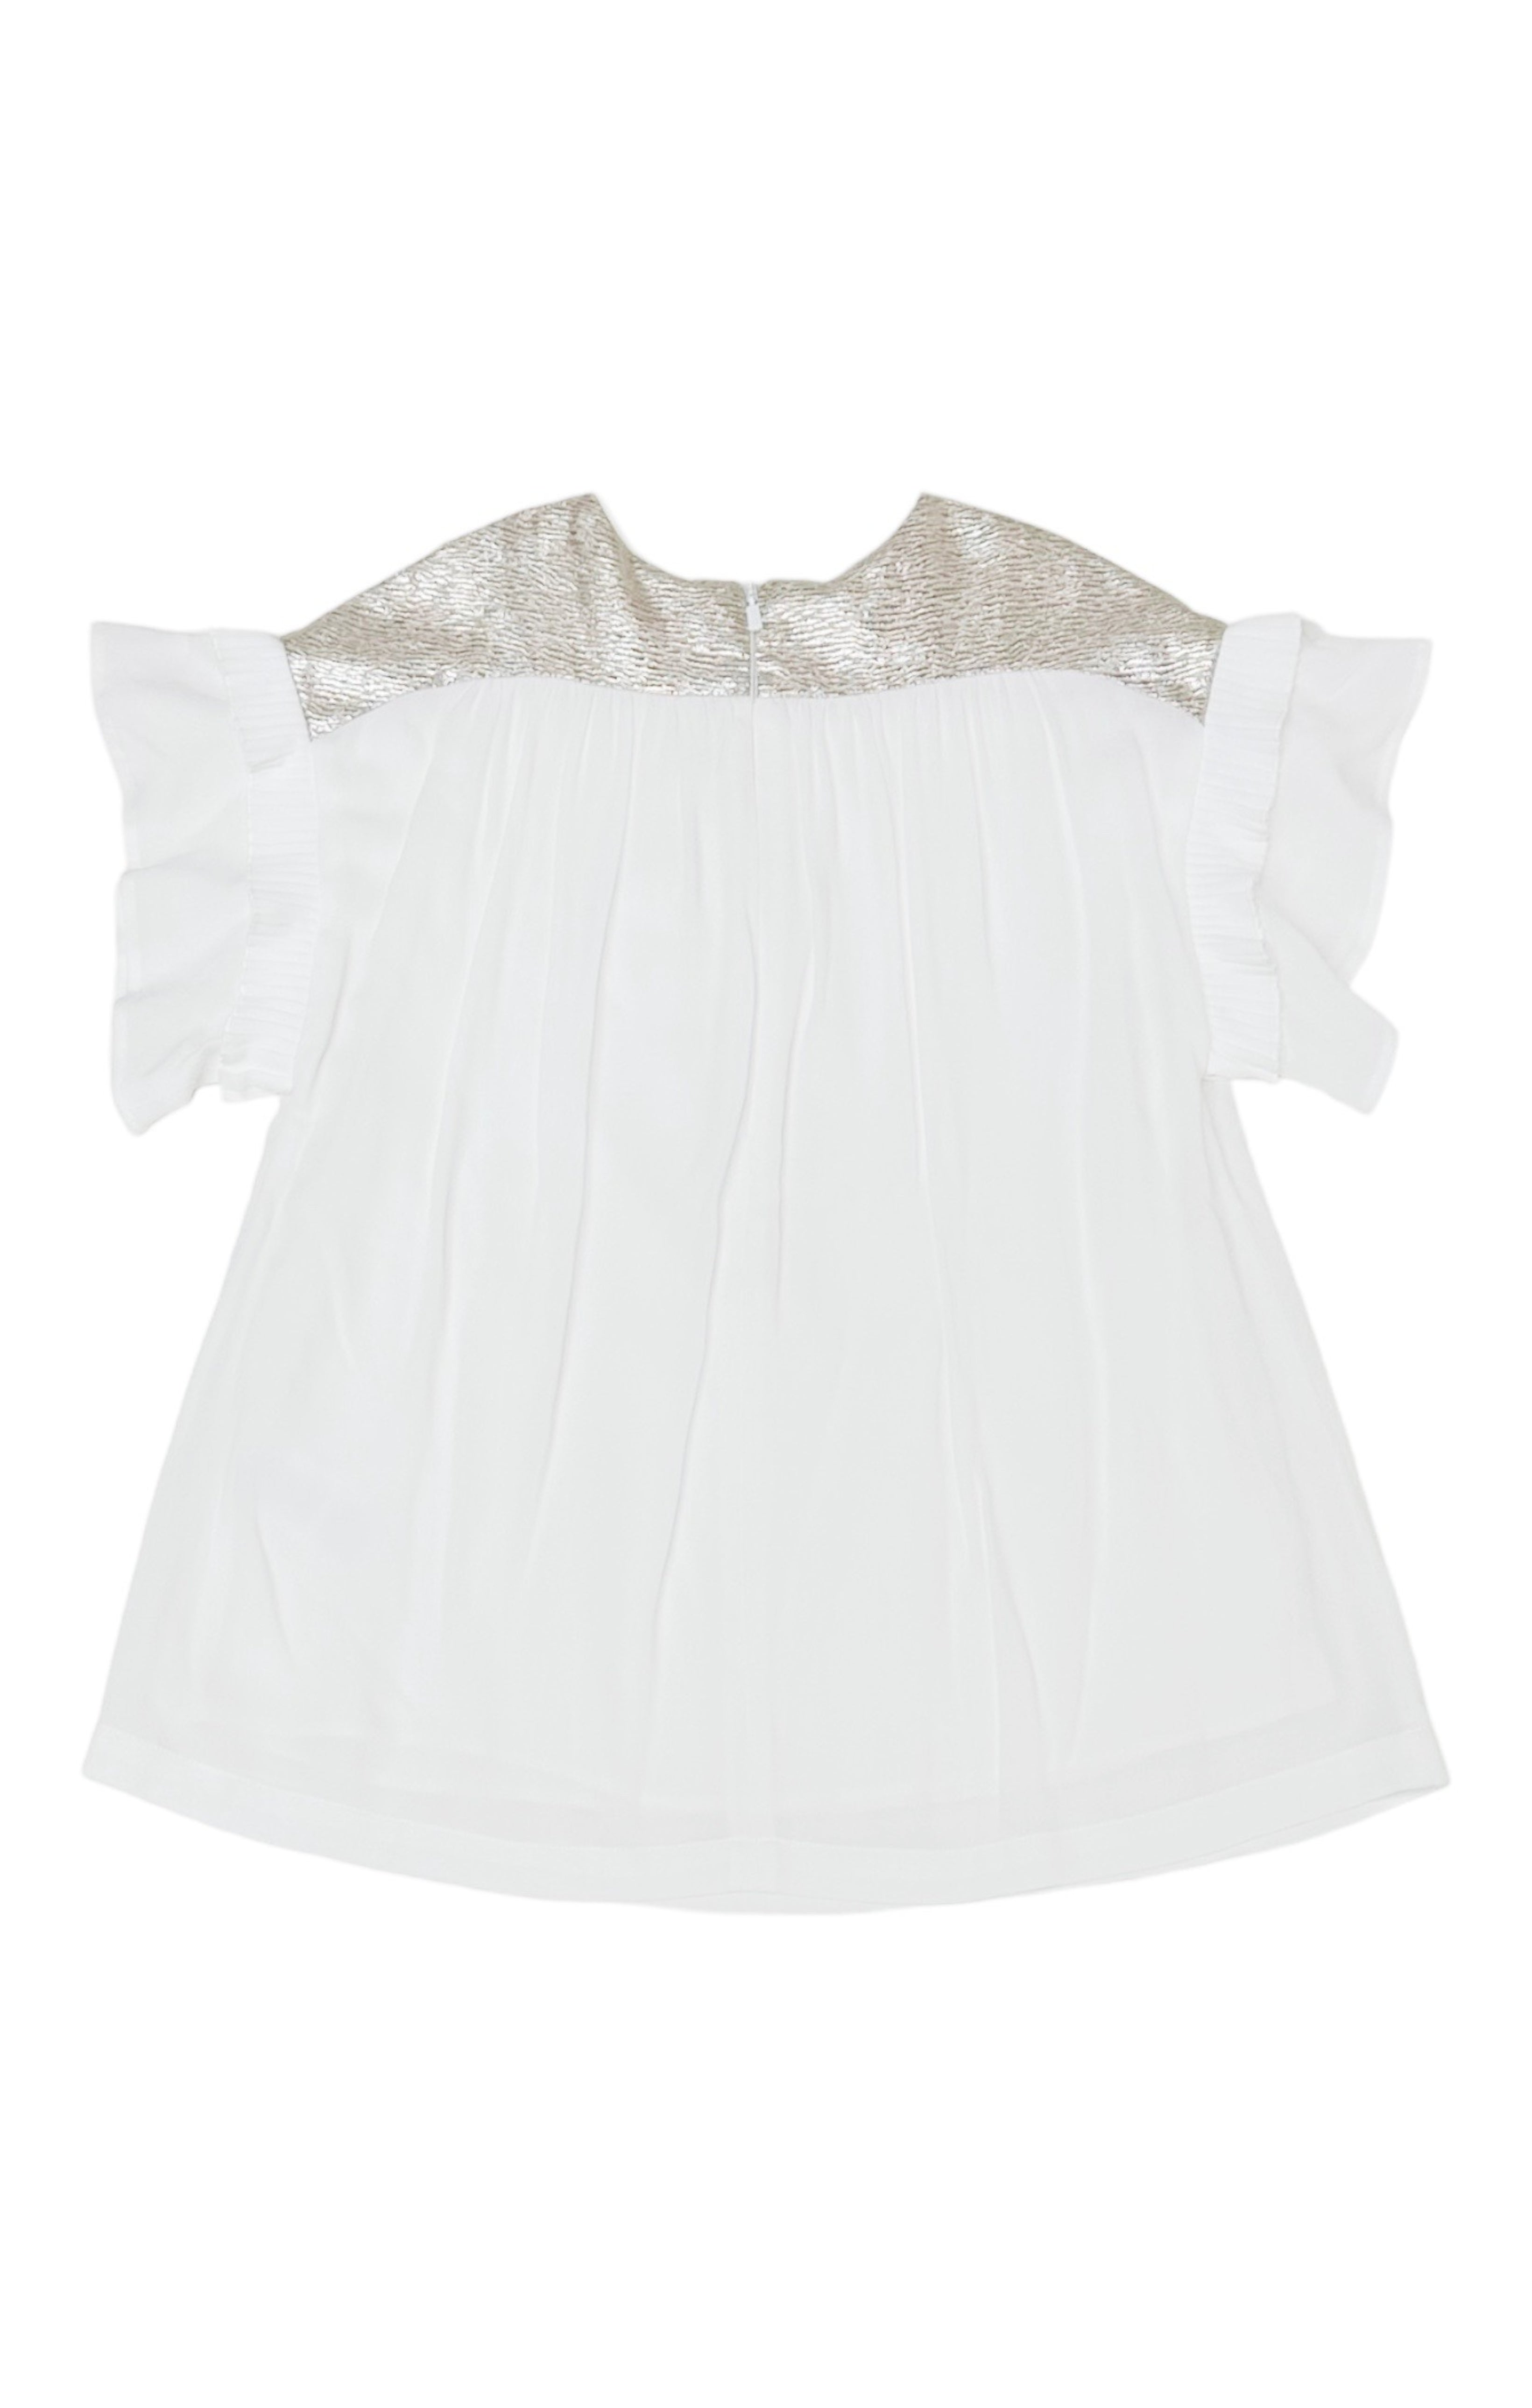 CHLOÉ (NEW) with tags Dress Size: 4 Years